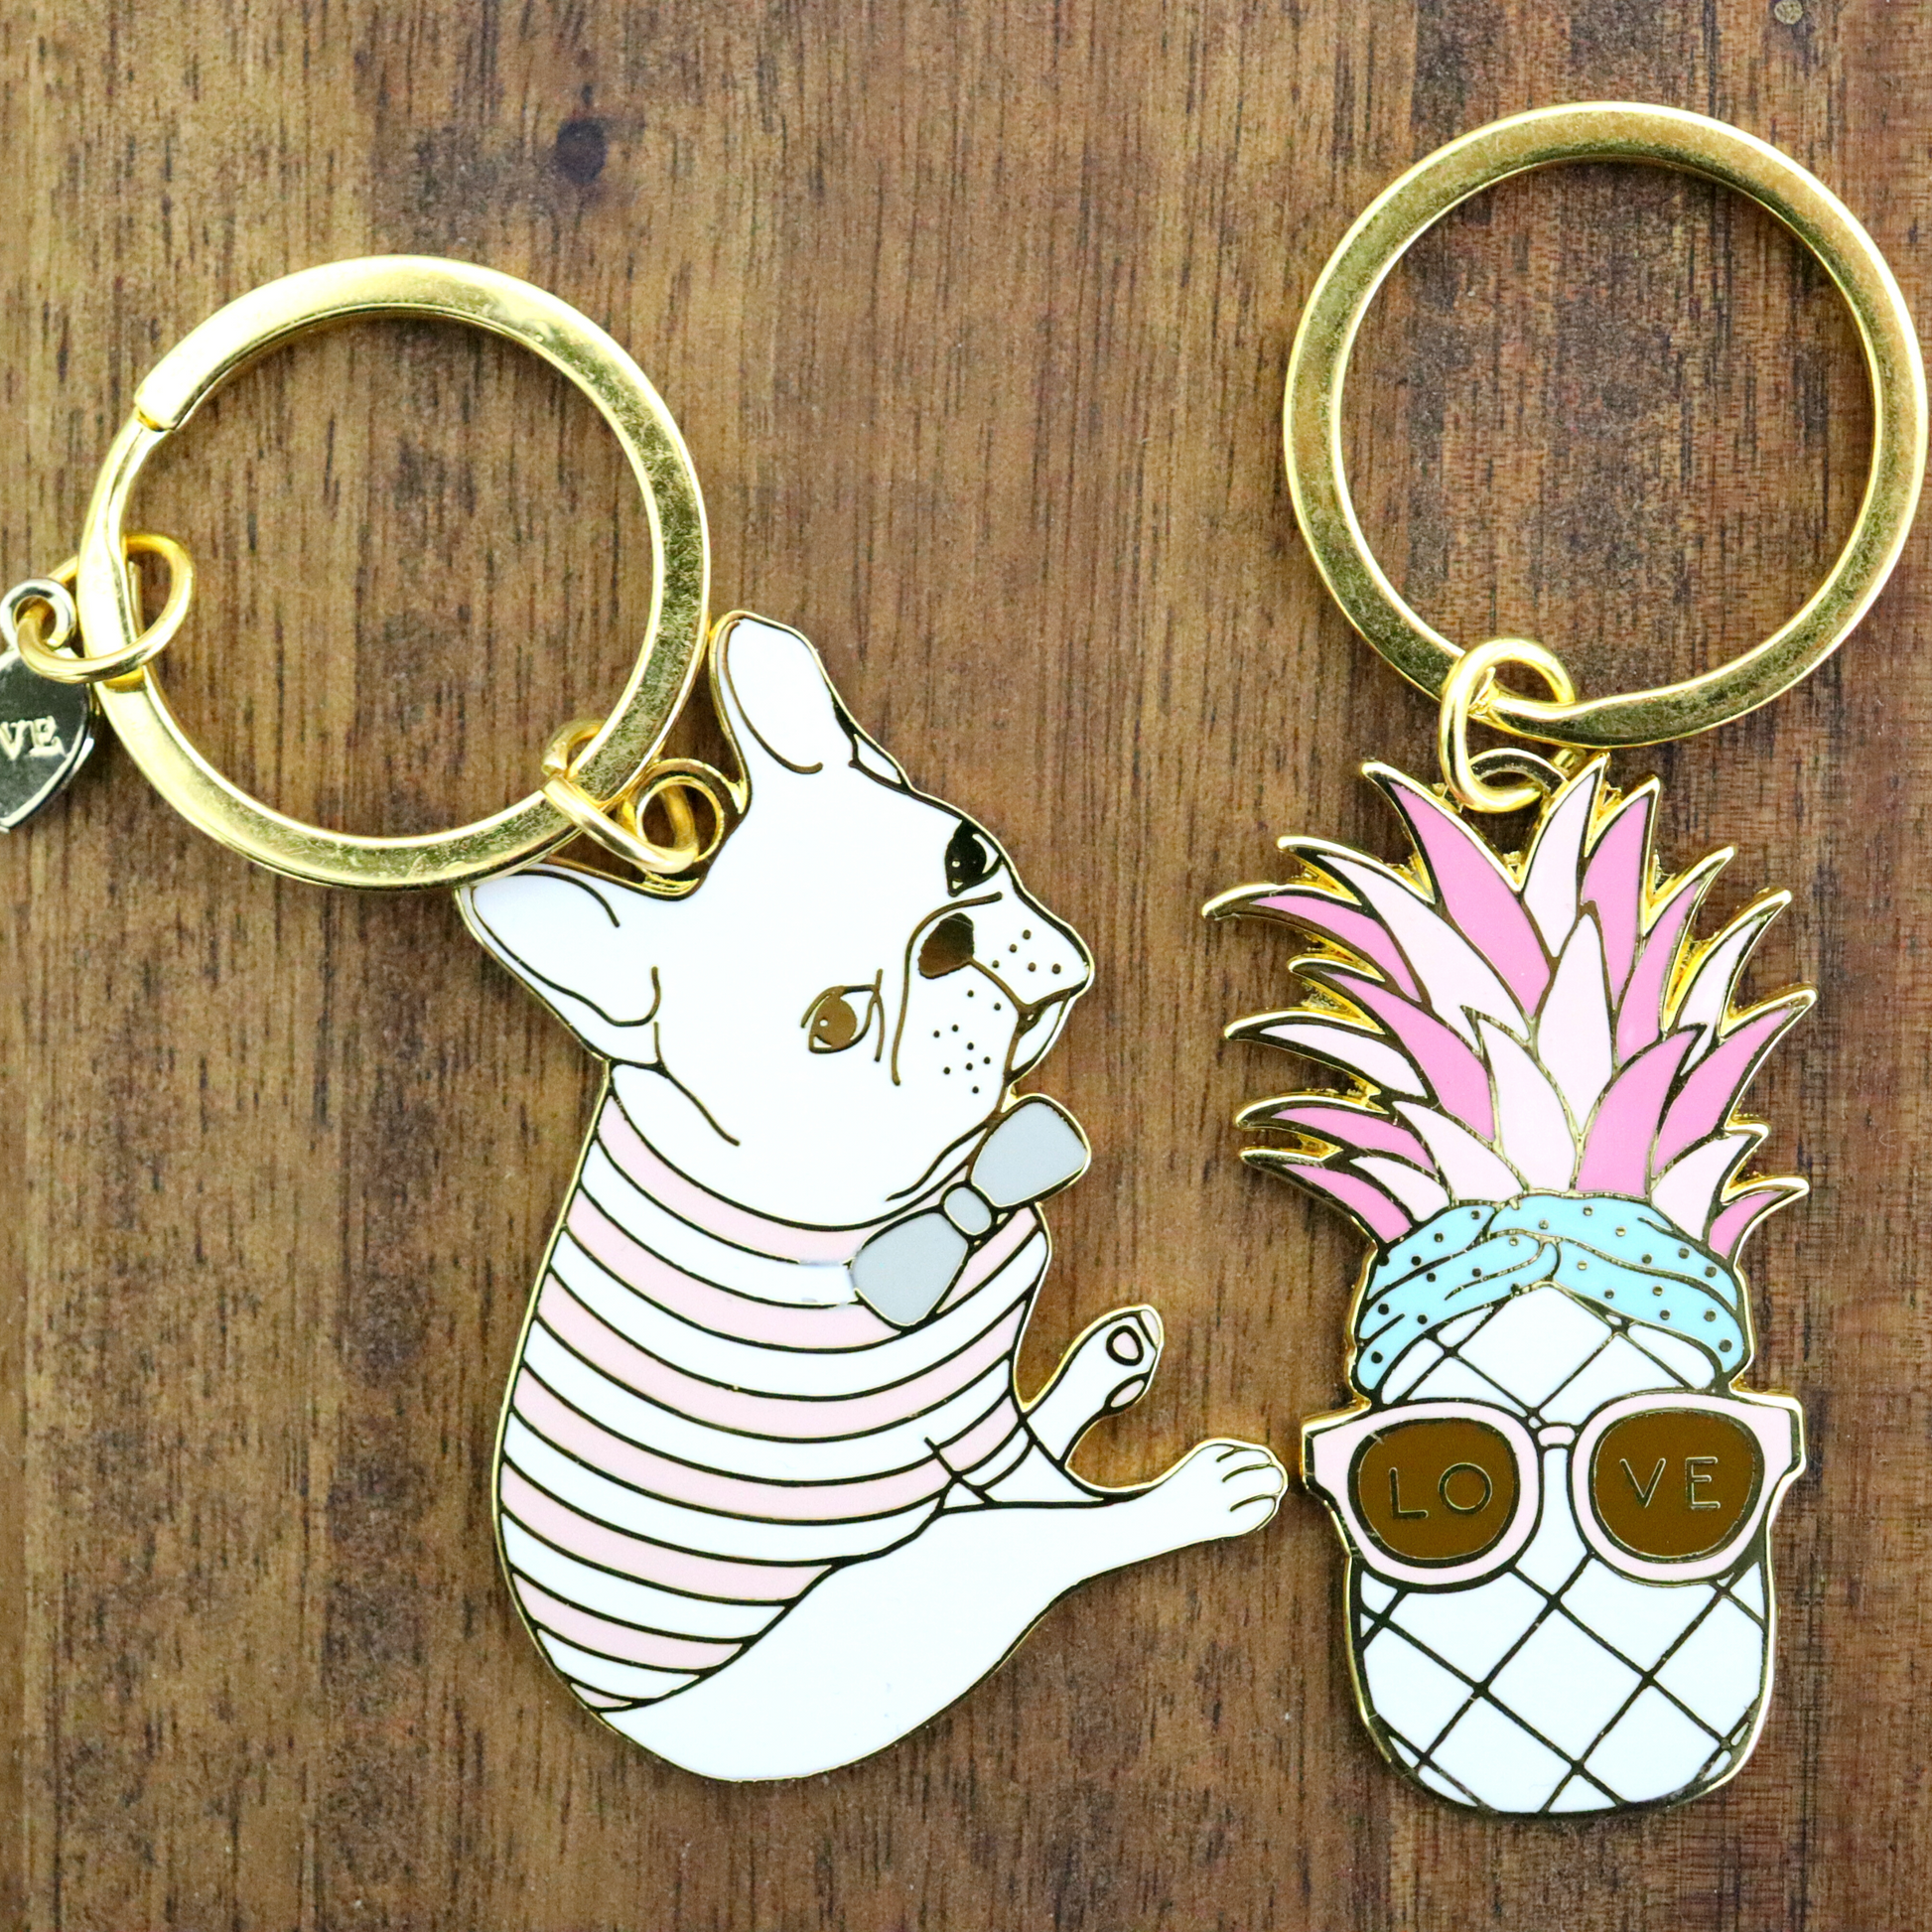 French Bulldog & Love Heart Keychain - Enamel Keyring, Quirky, Pink Striped Tee Frenchie with Bow